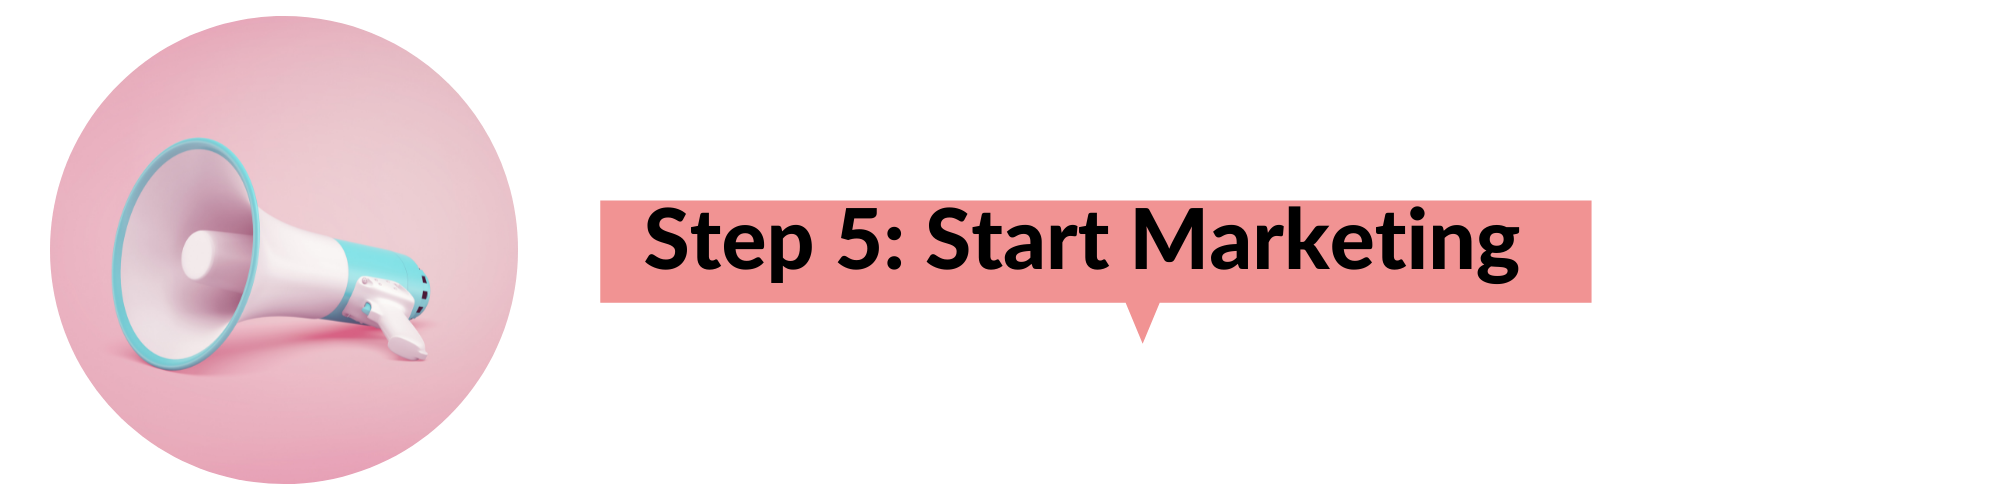 Step Five Star Marketing , showing a speaker positioned on a pink background